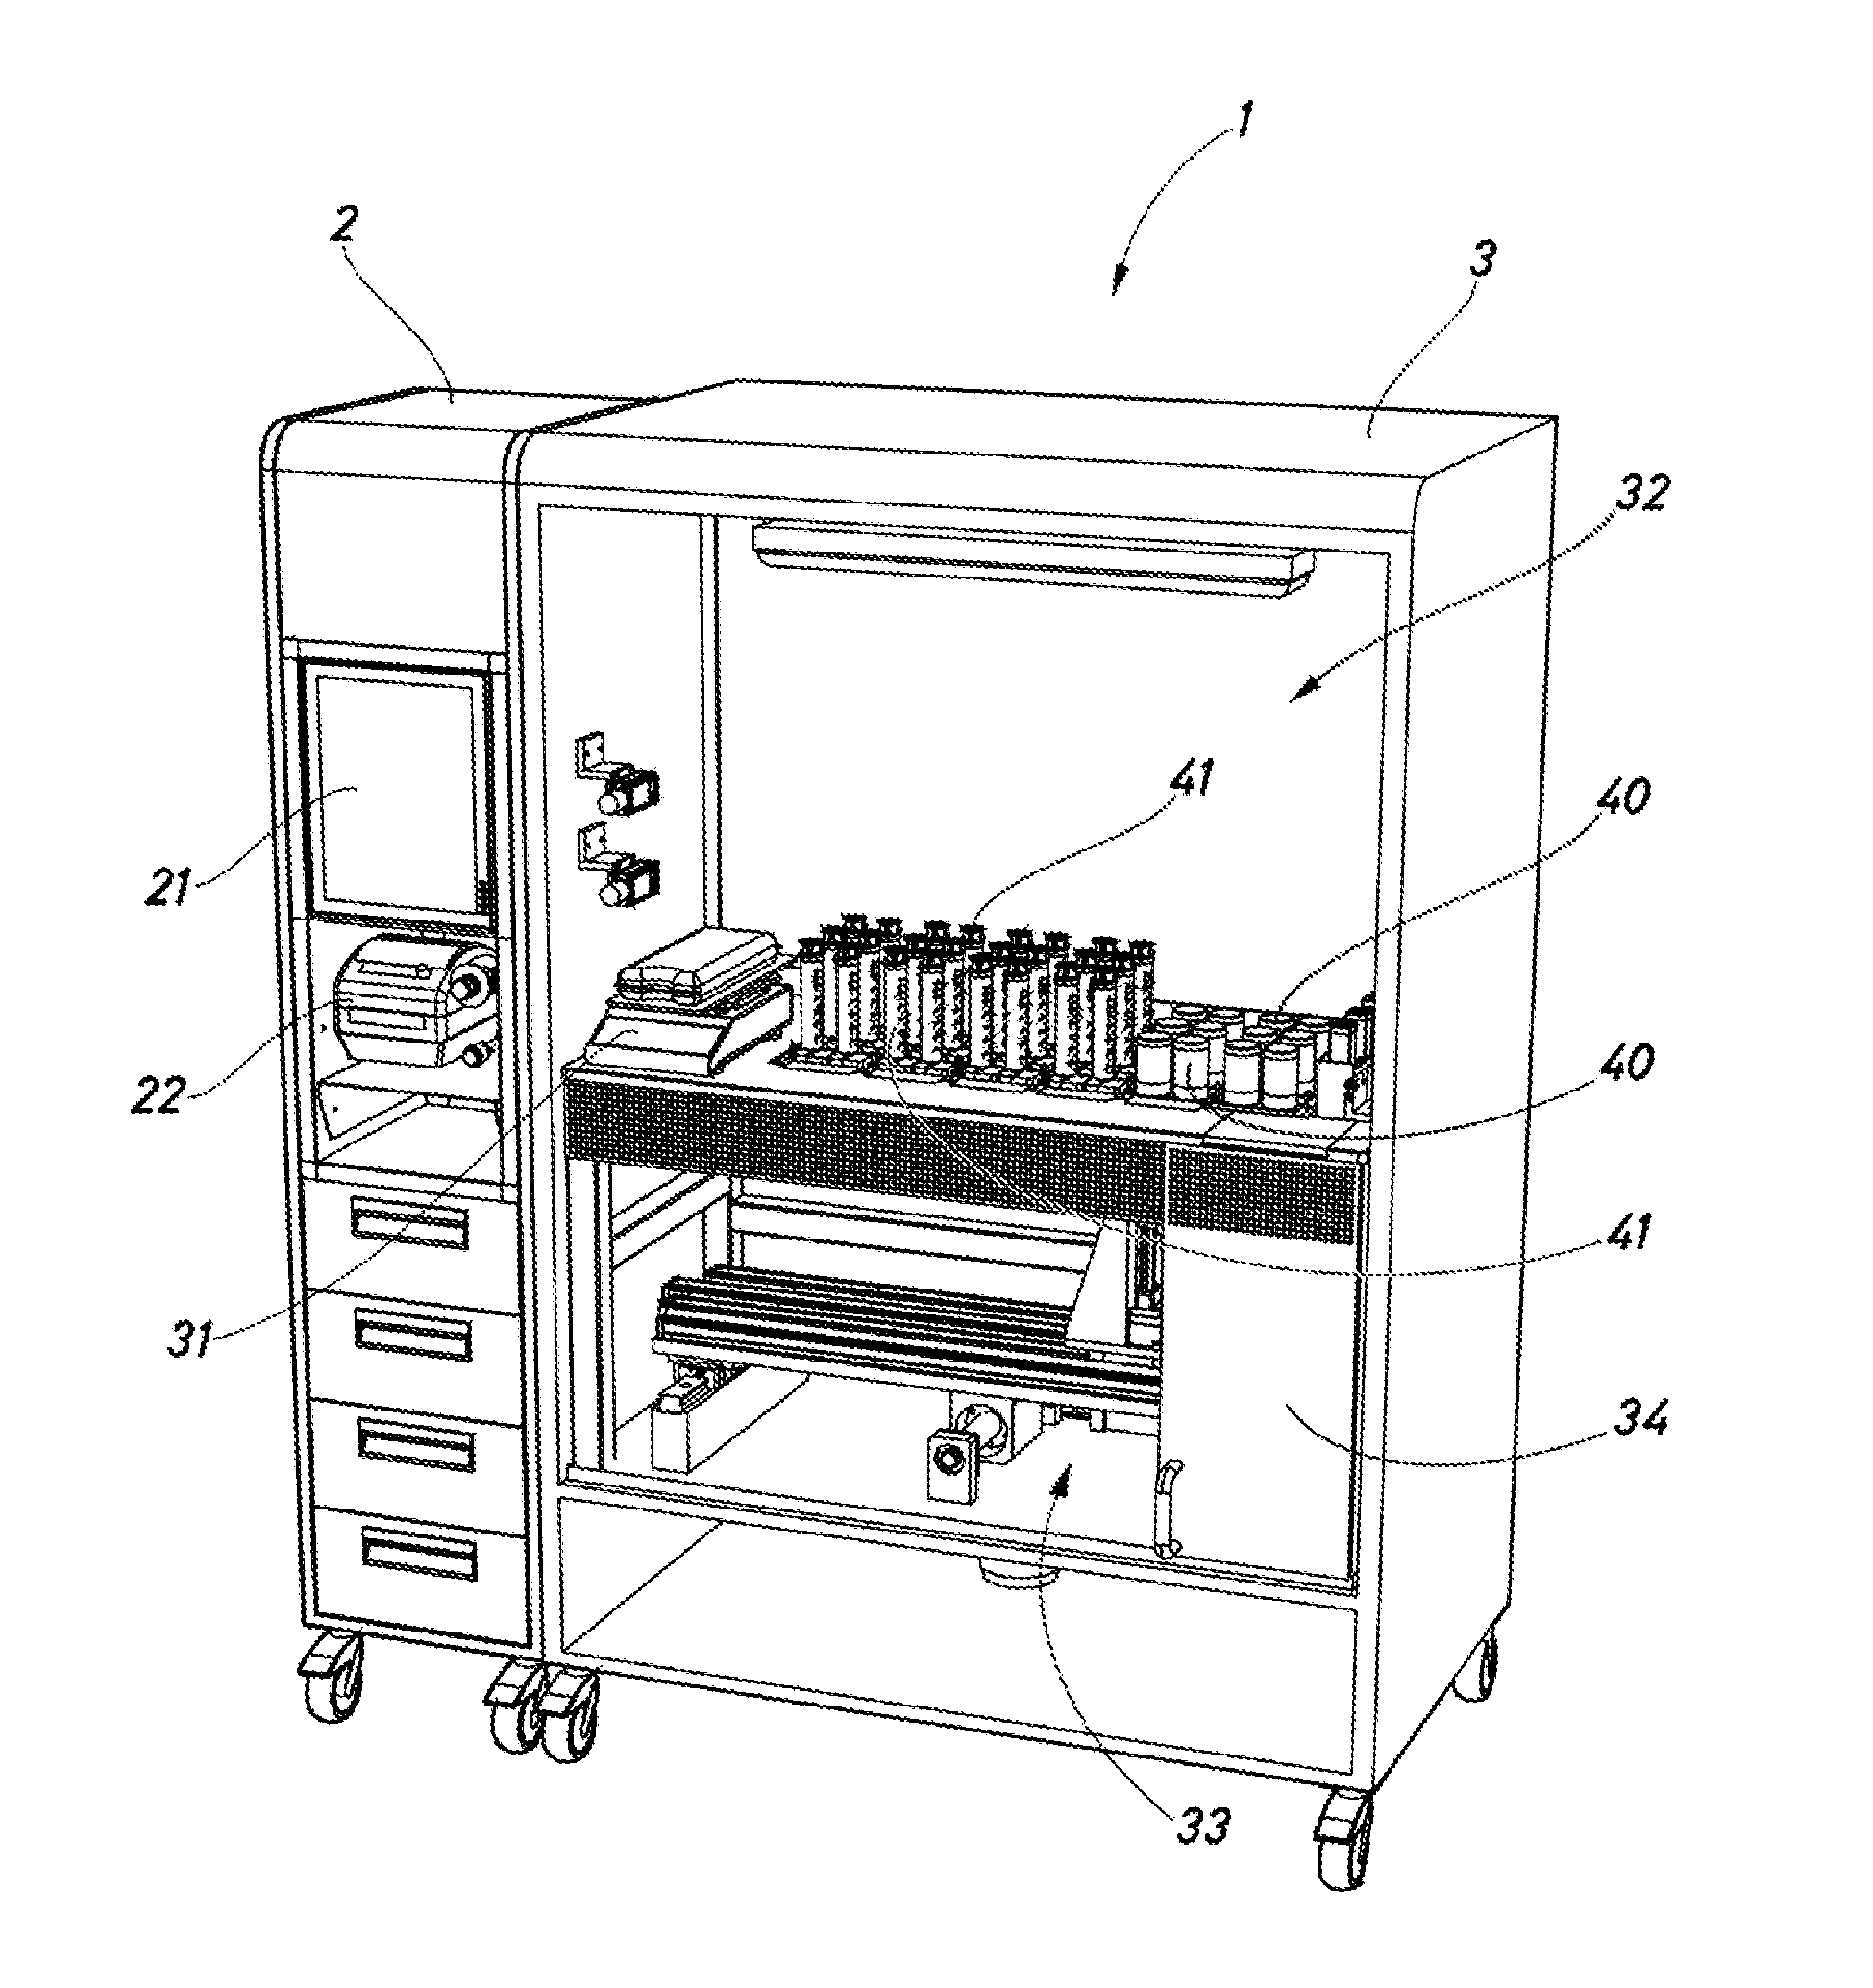 Machine and method for the automatic preparation of substances for intravenous application